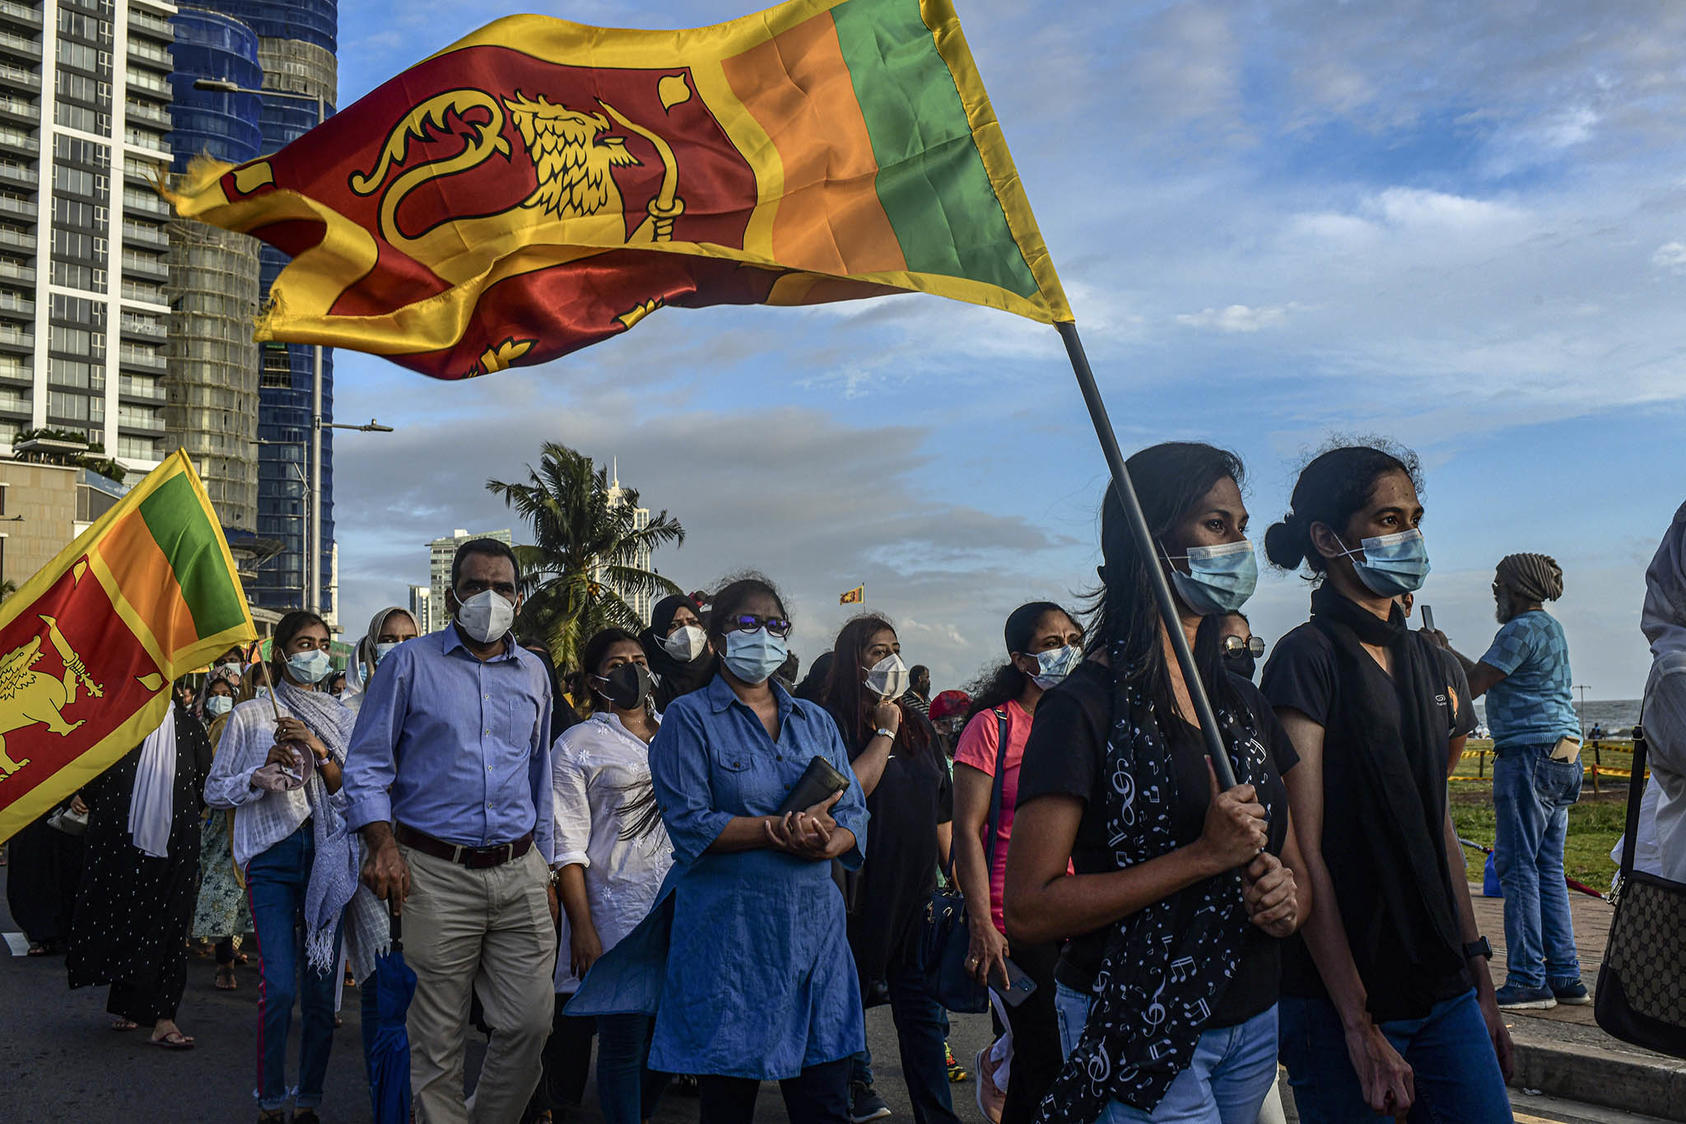 Sri Lanka: 'The protests have changed thinking for the better